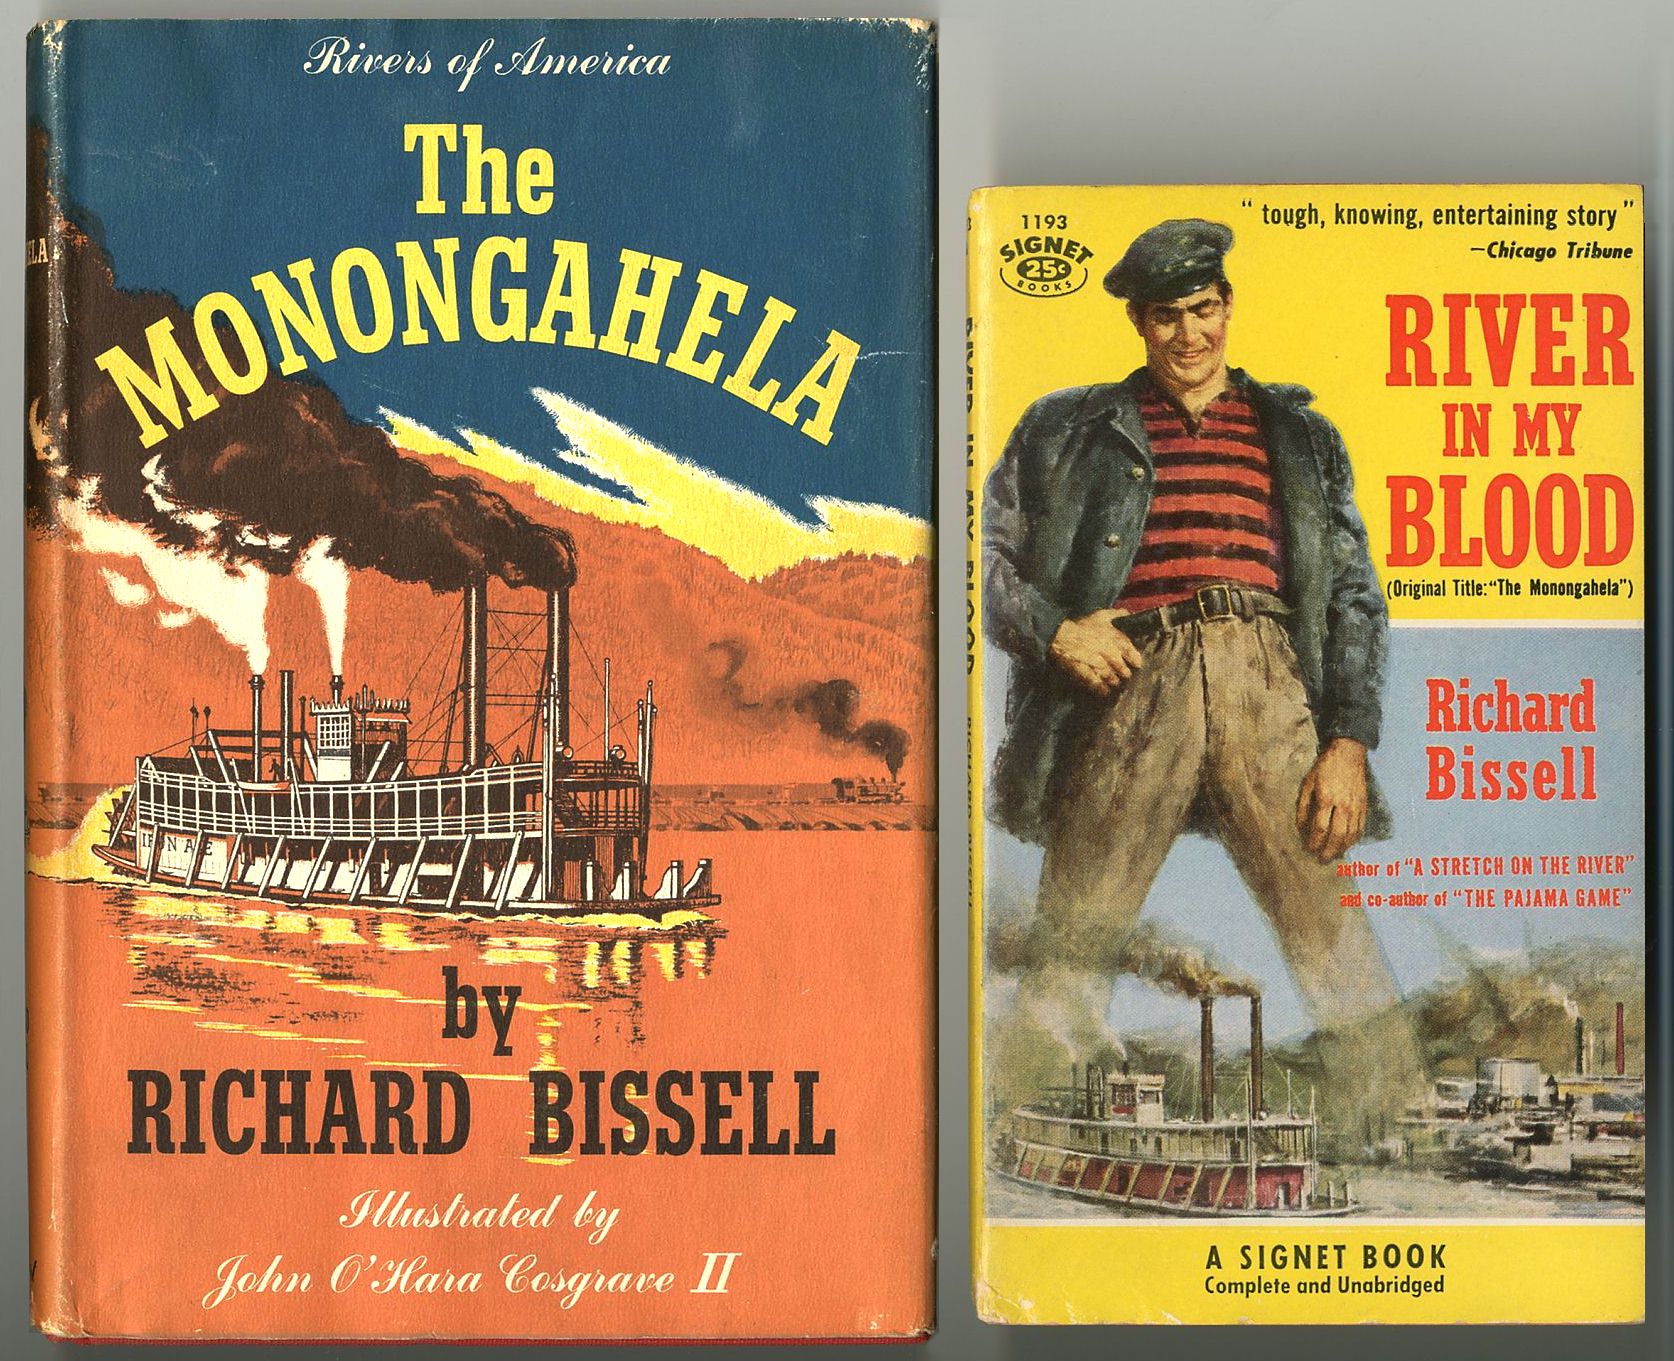 book covers including steamboat illustrations